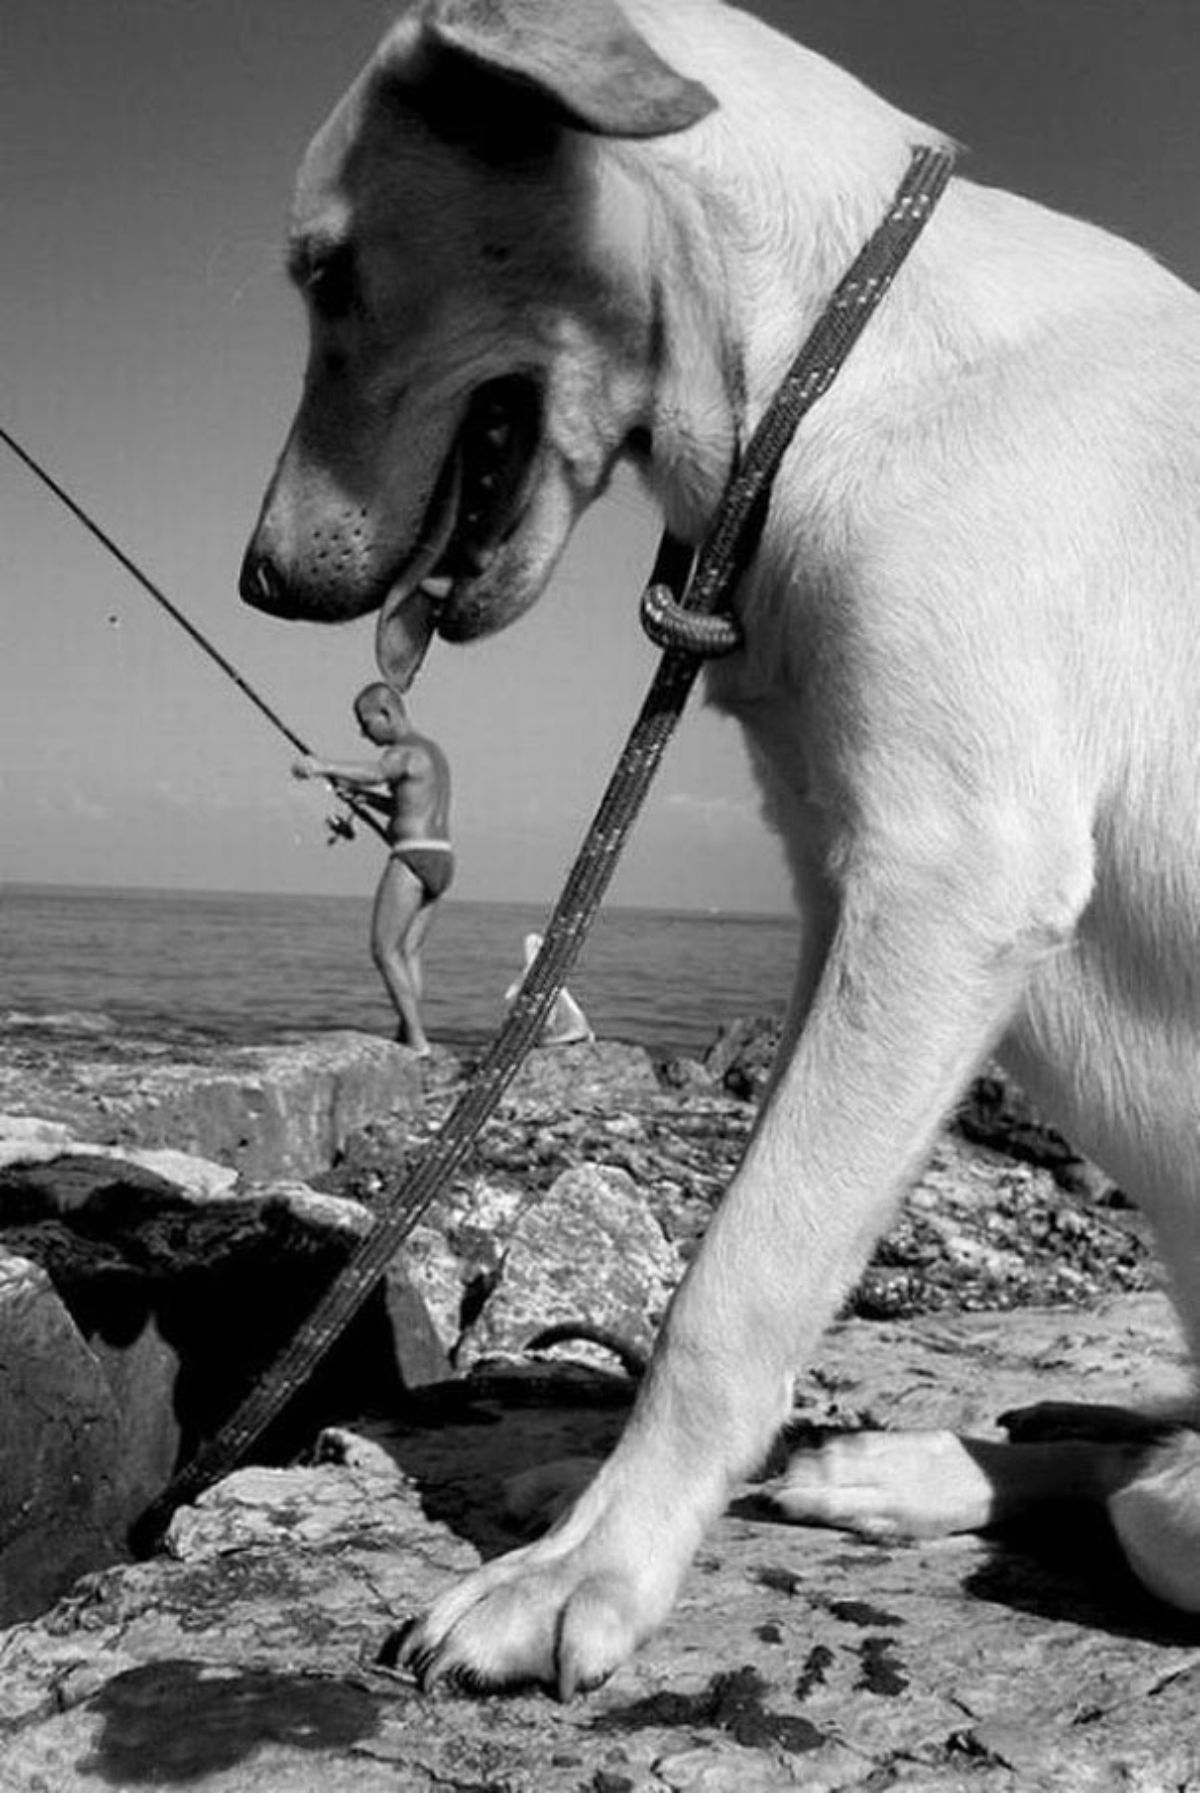 black and white photo of a dog looking like it is licking a small shirtless man fishing further away